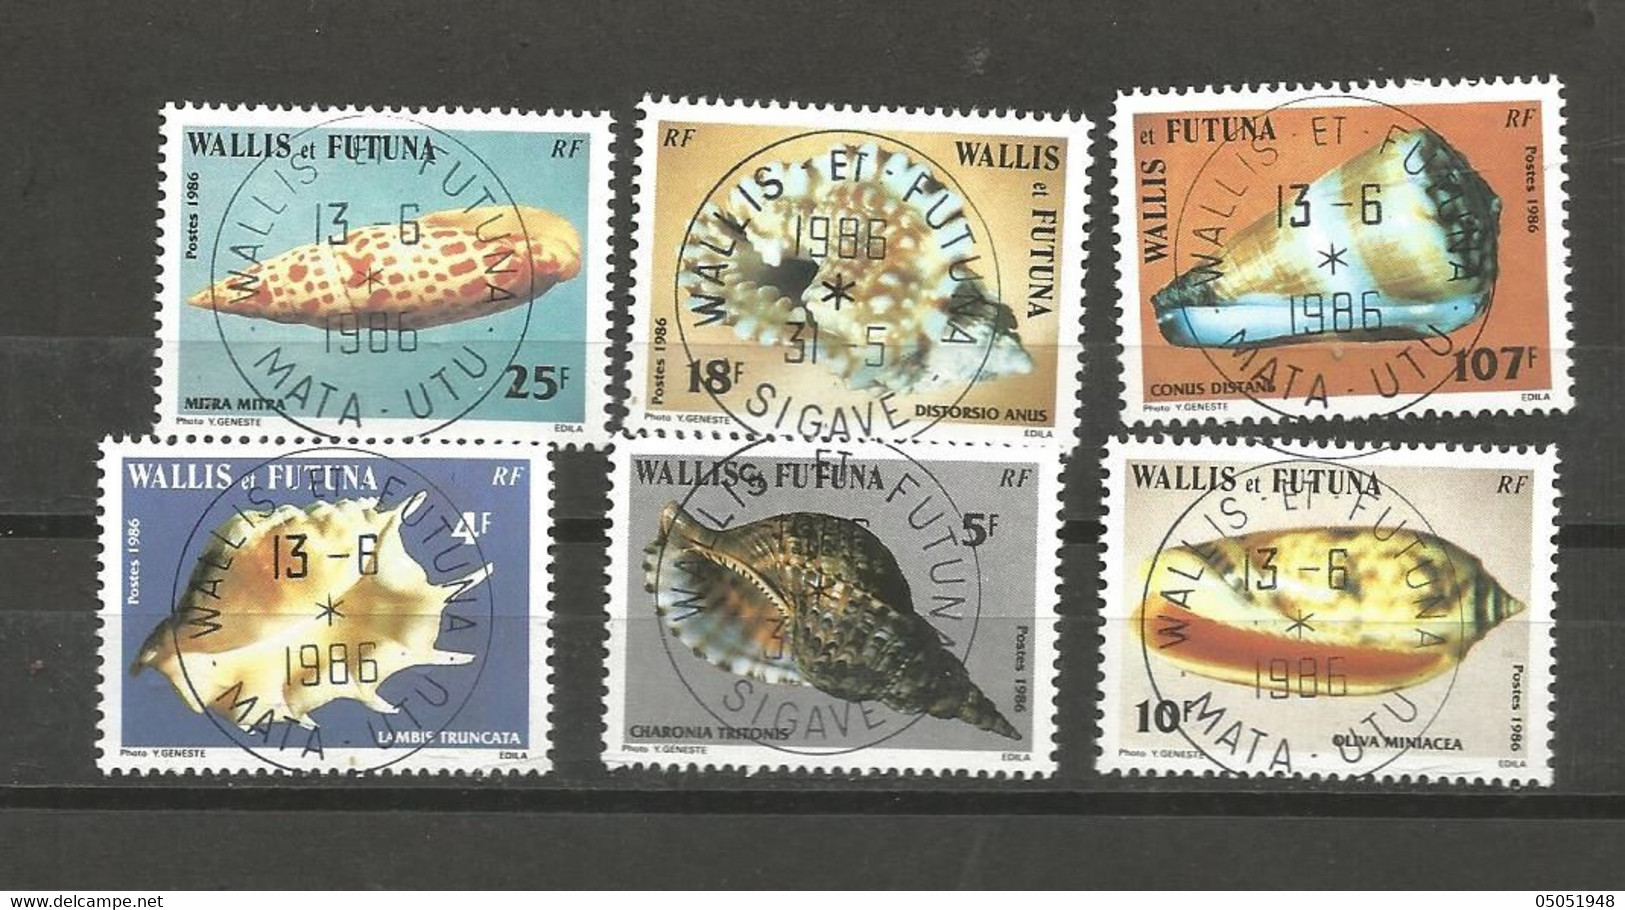 337/42  Coquillages   Beaux Cachets     De MATA UTU       (clasfdcroug) - Used Stamps